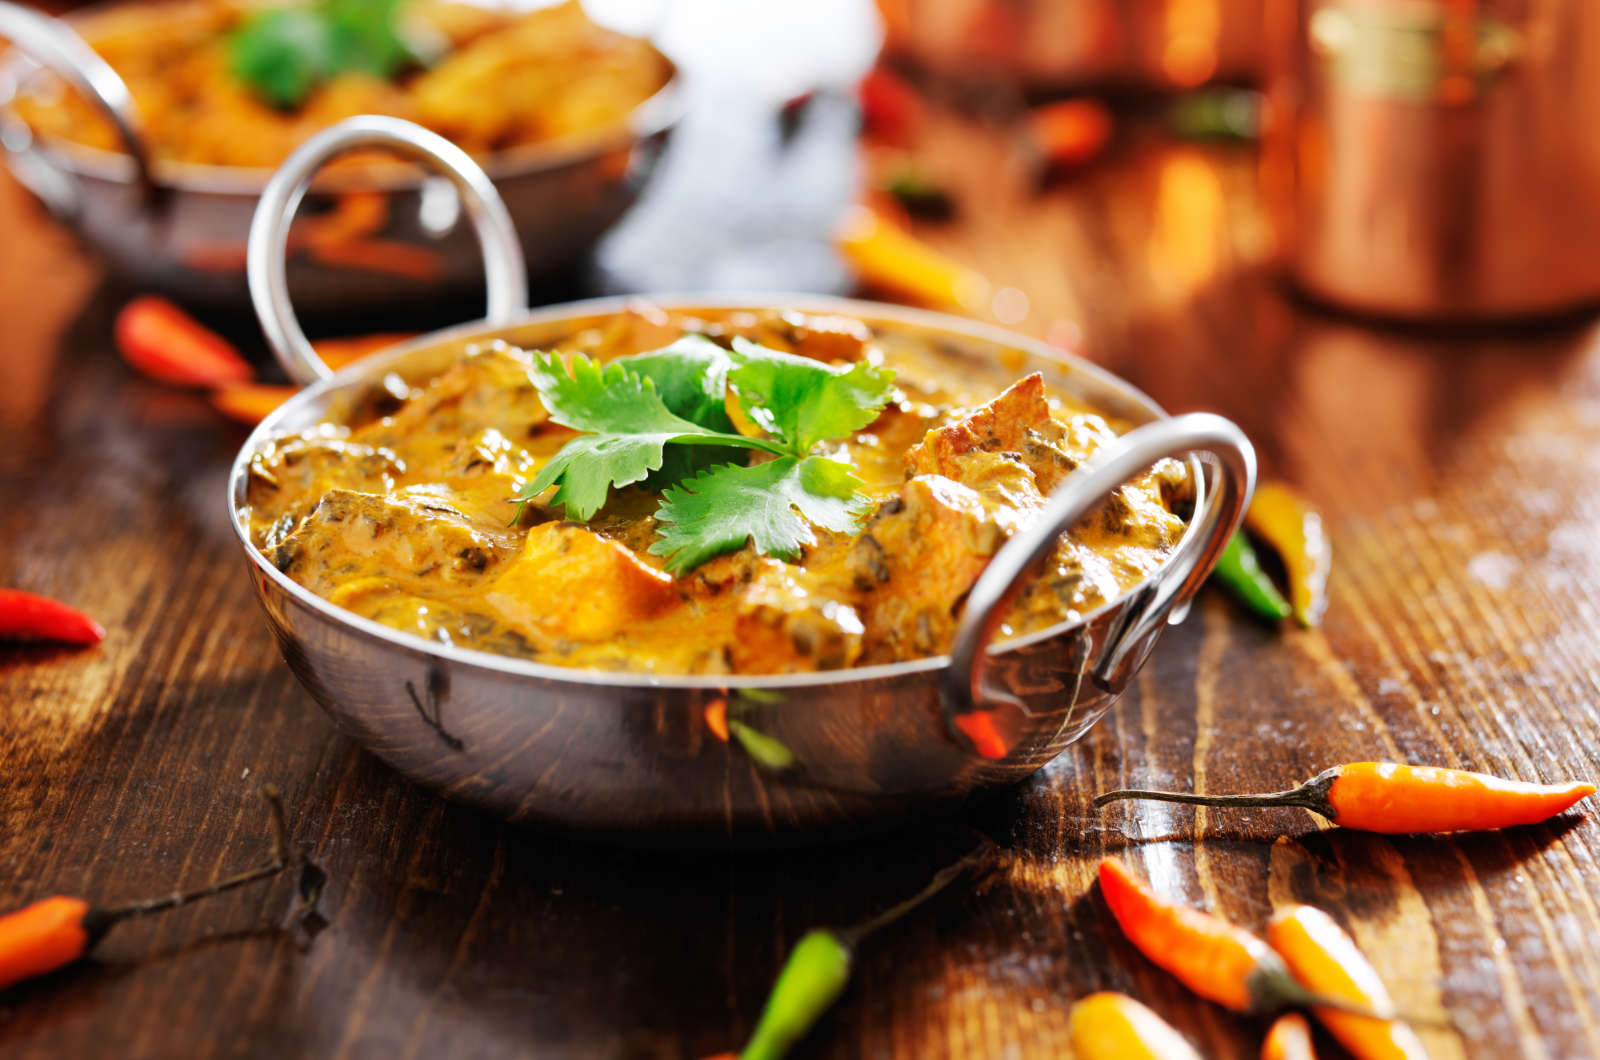 Top 5 Dishes You Can’t Miss in Punjab